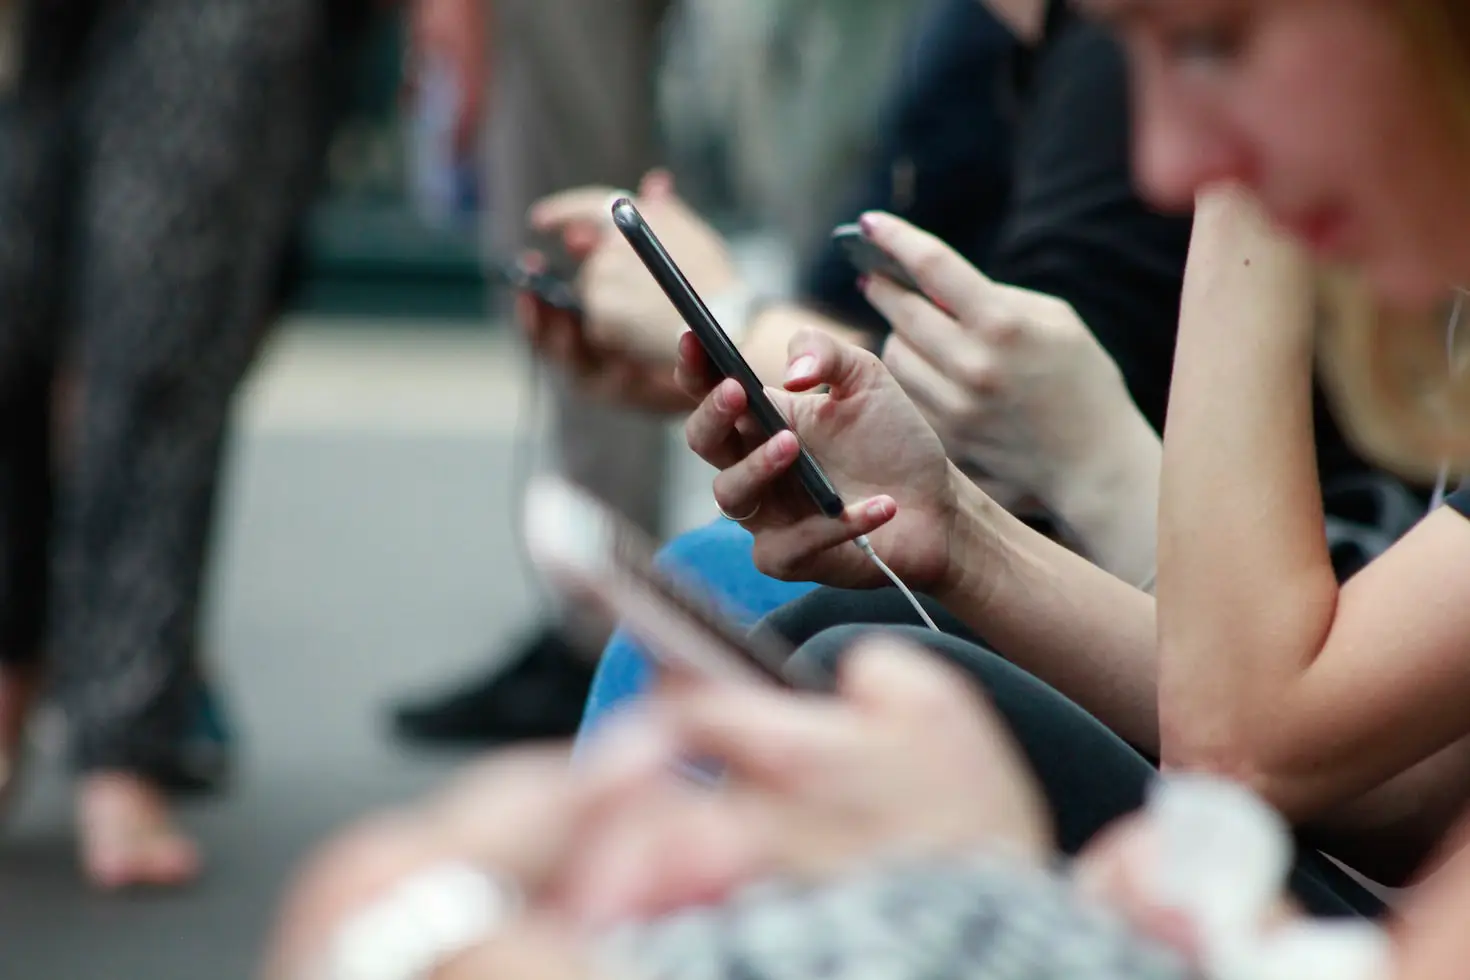 More people are browsing the internet using their mobile devices.